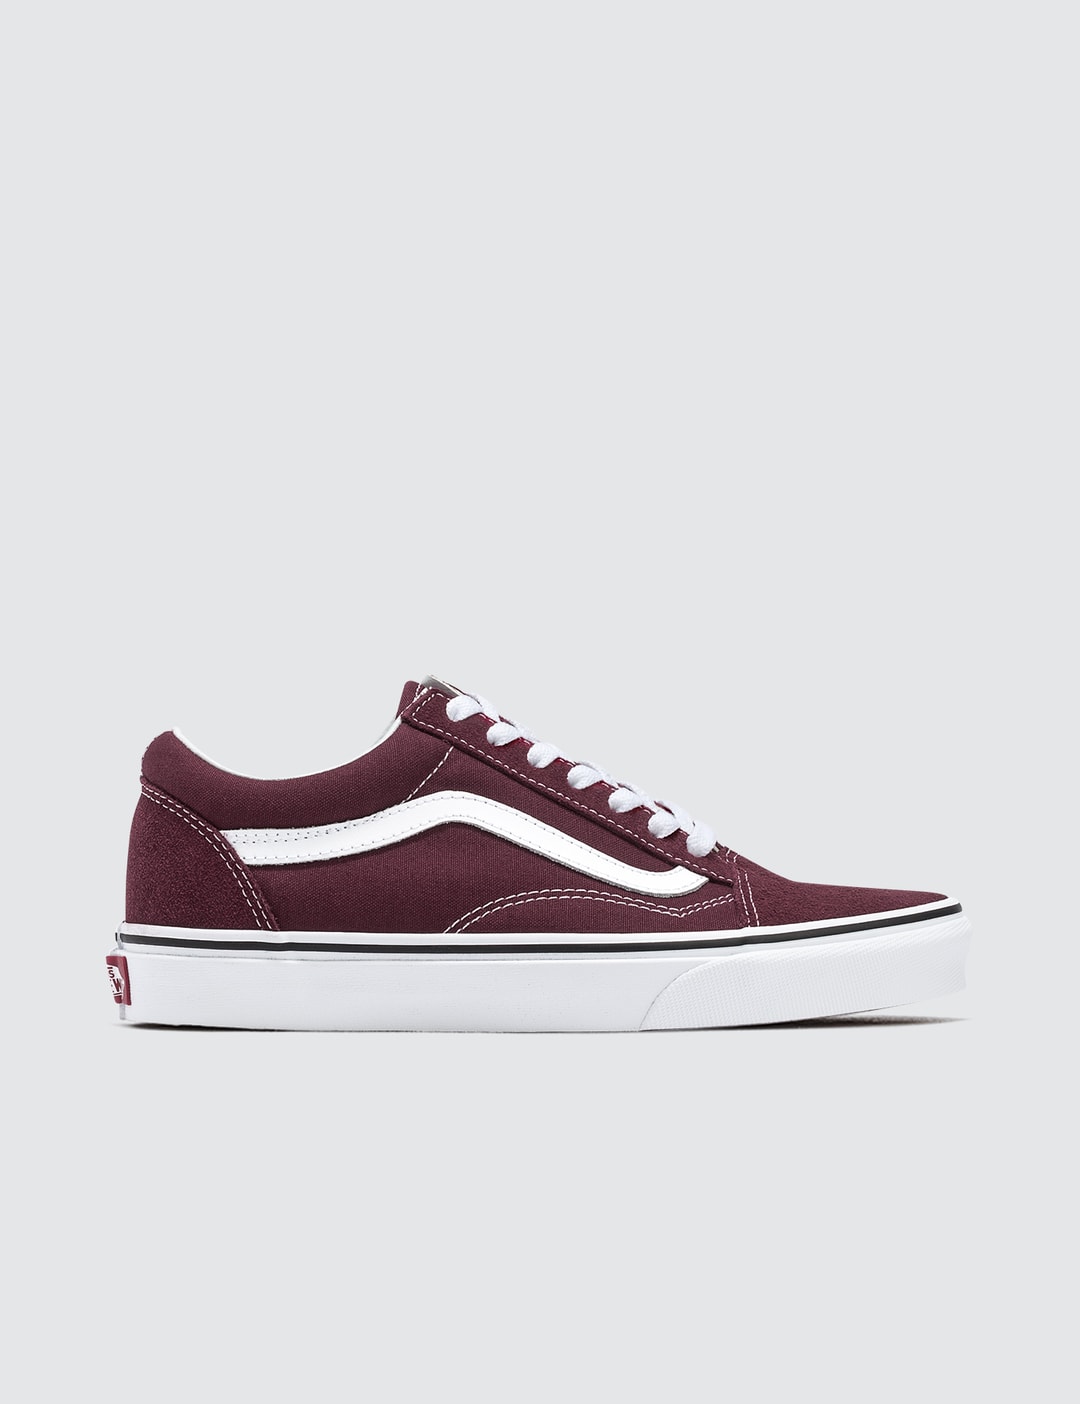 Vans - Old Skool | HBX - Globally Curated Fashion and Lifestyle by ...